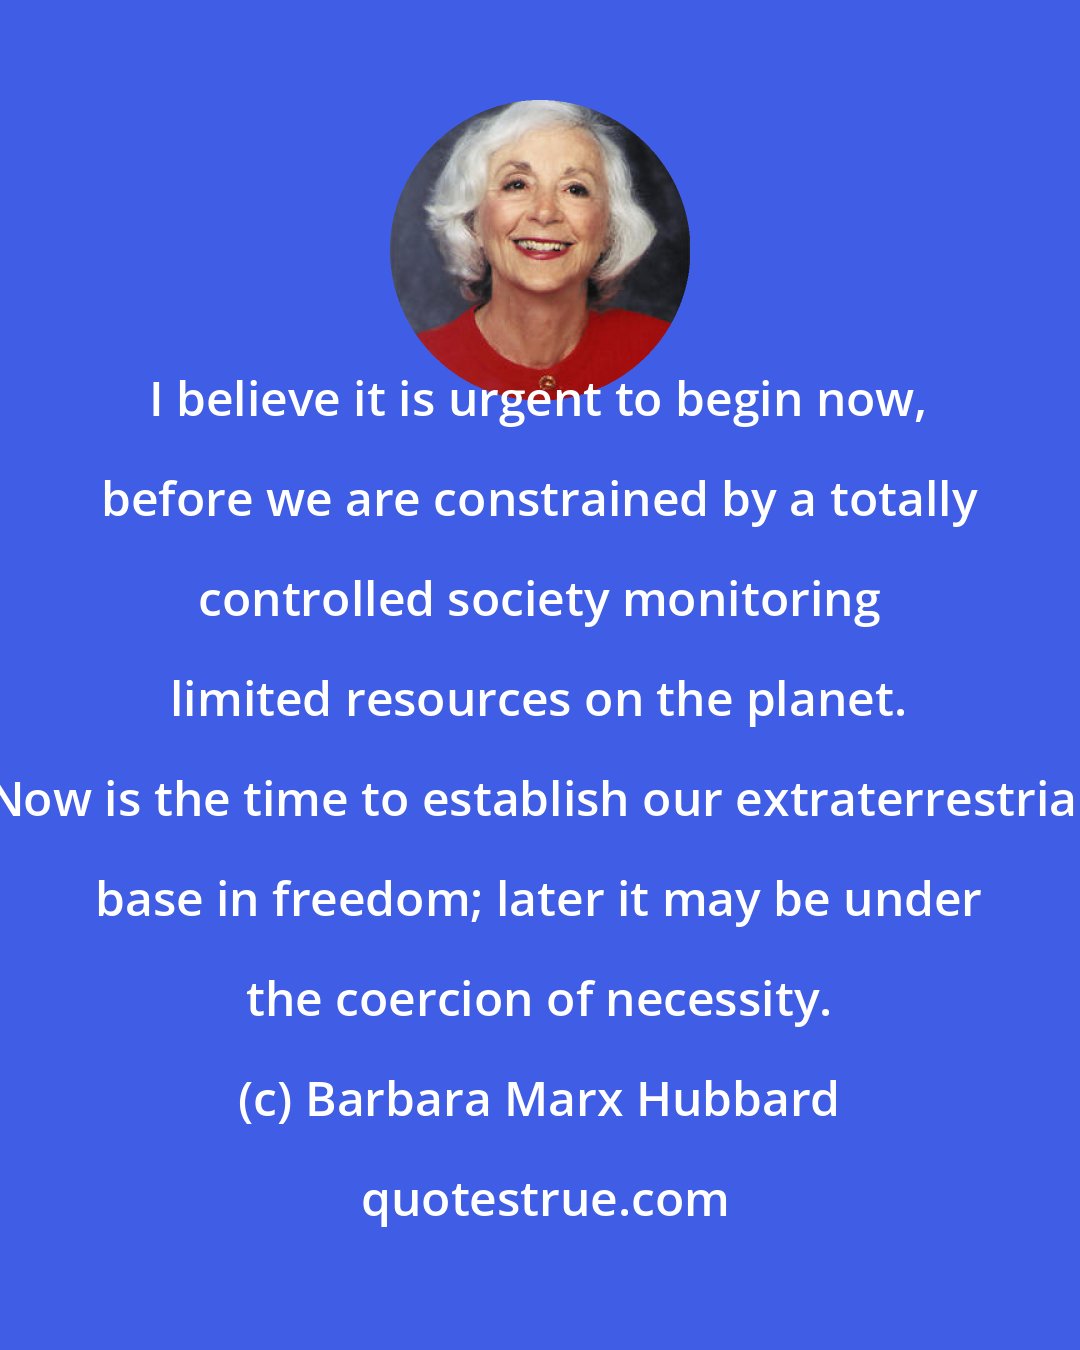 Barbara Marx Hubbard: I believe it is urgent to begin now, before we are constrained by a totally controlled society monitoring limited resources on the planet. Now is the time to establish our extraterrestrial base in freedom; later it may be under the coercion of necessity.